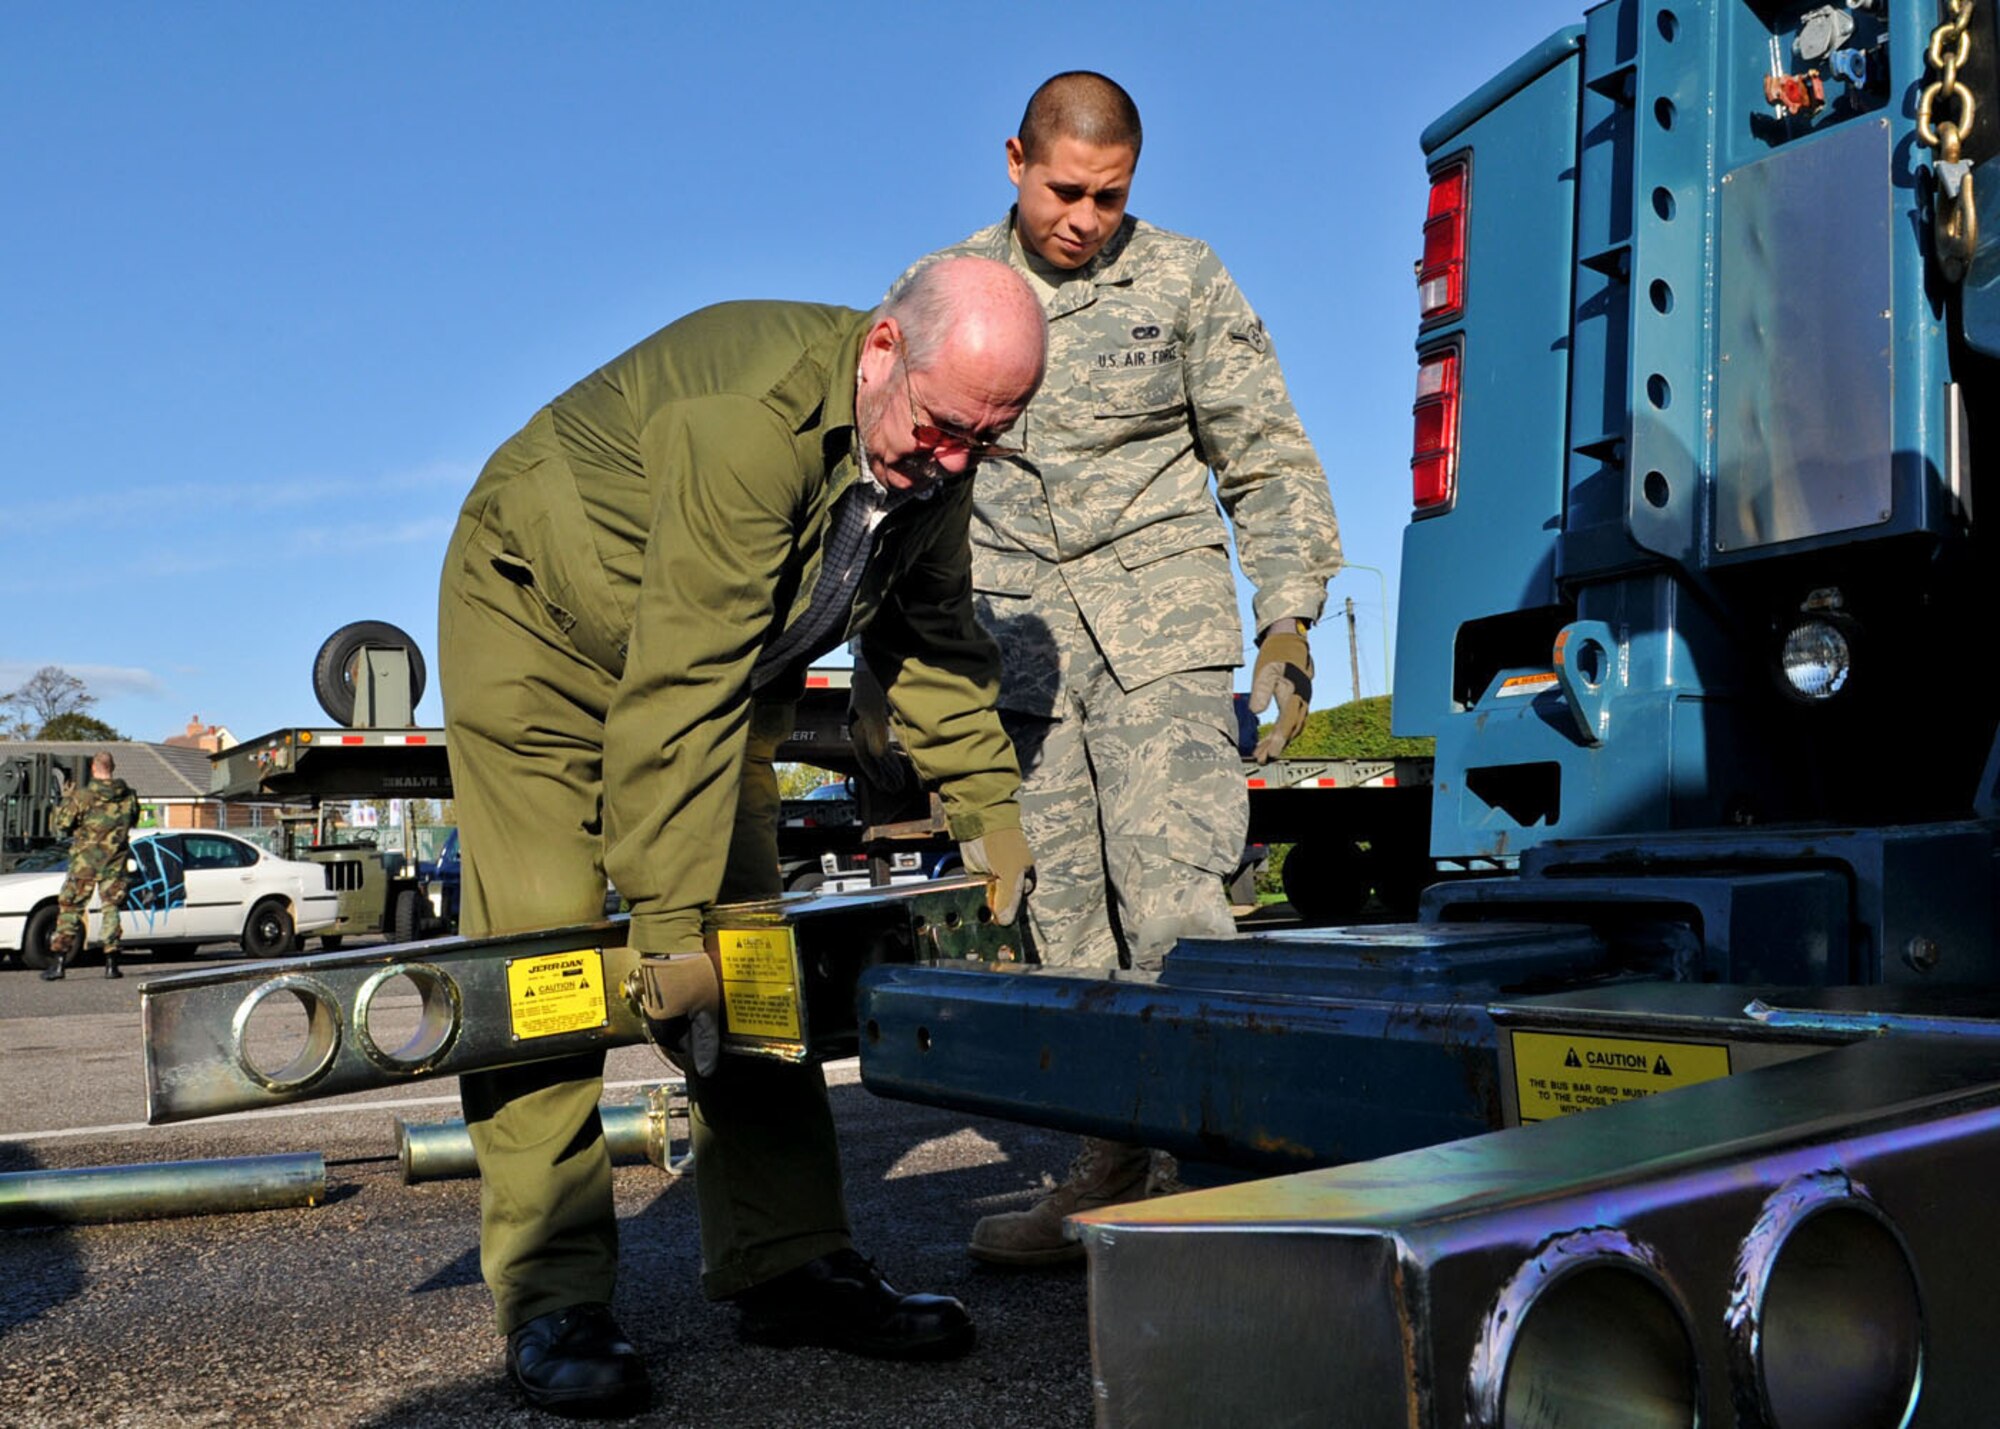 John Lake, 100th Logistics Readiness Squadron vehicle operator, installs a bus bar grid to a cross tube, while Airman Jonathan Loera, also a 100th LRS vehicle operator, looks on during 35-ton recovery training (commonly referred to as wrecker training) Oct. 27, 2008. The training, at RAF Mildenhall, England, was held to certify and give hands on experience to vehicle operators for the proper use and basic knowledge of using the Wrecker vehicles. (U.S. Air Force photo by Staff Sgt. Jerry Fleshman)